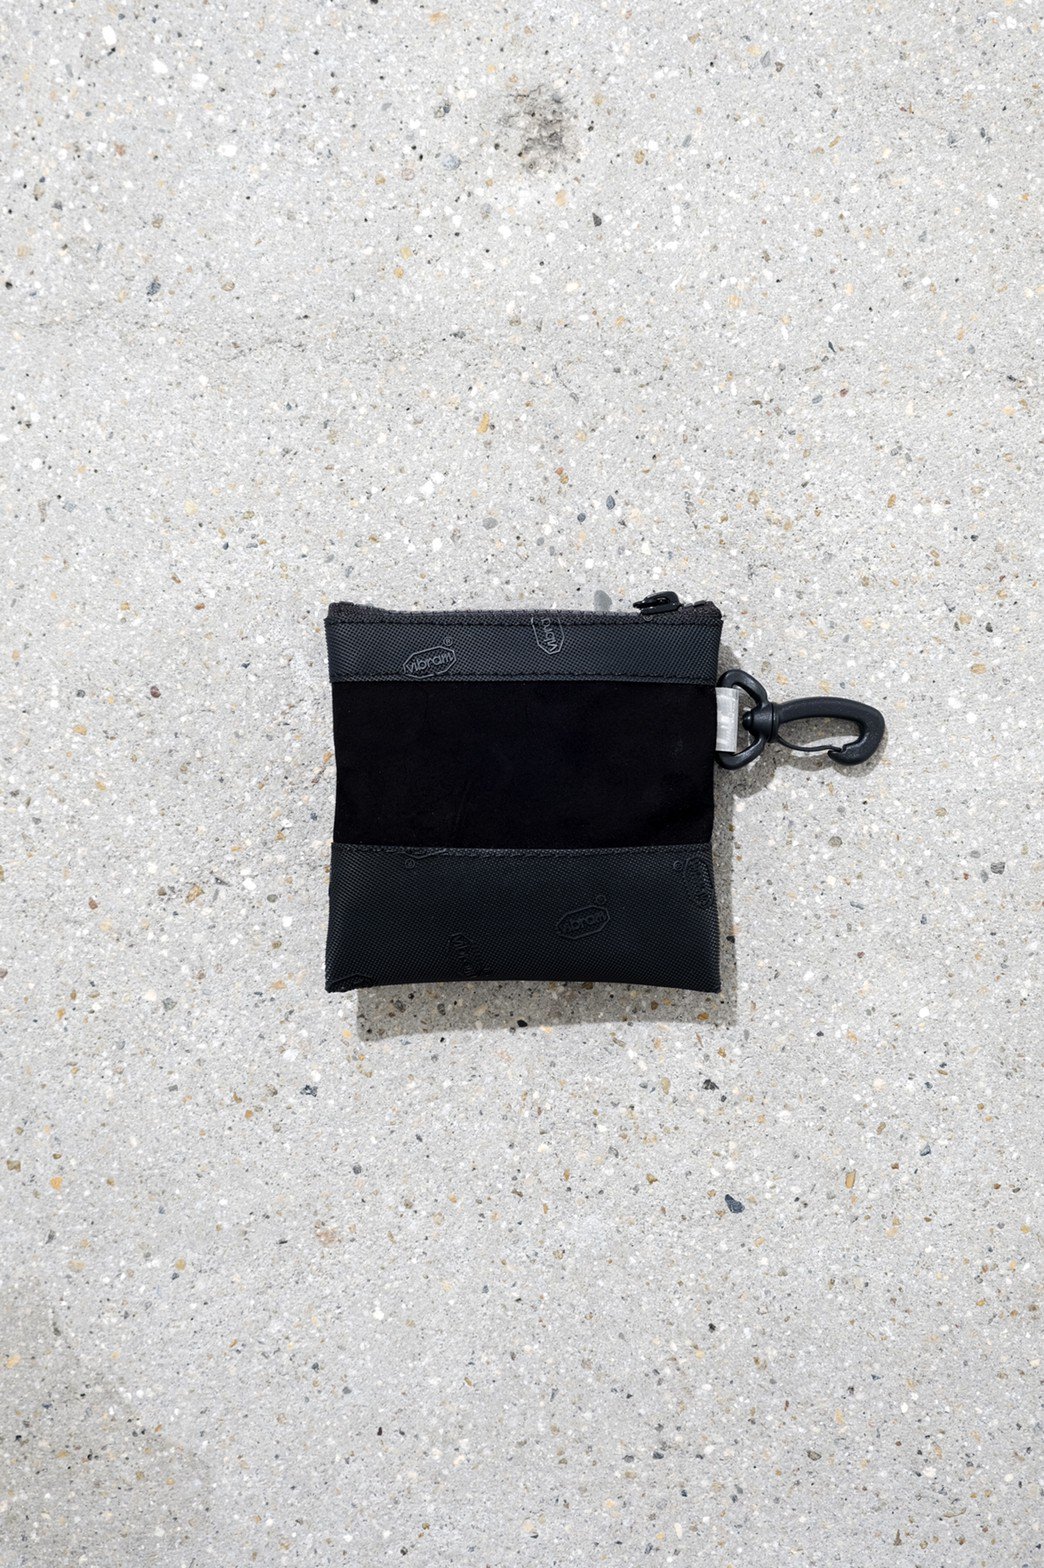 THISWAY / Vibram × Sheep Suede POUCH BLACK